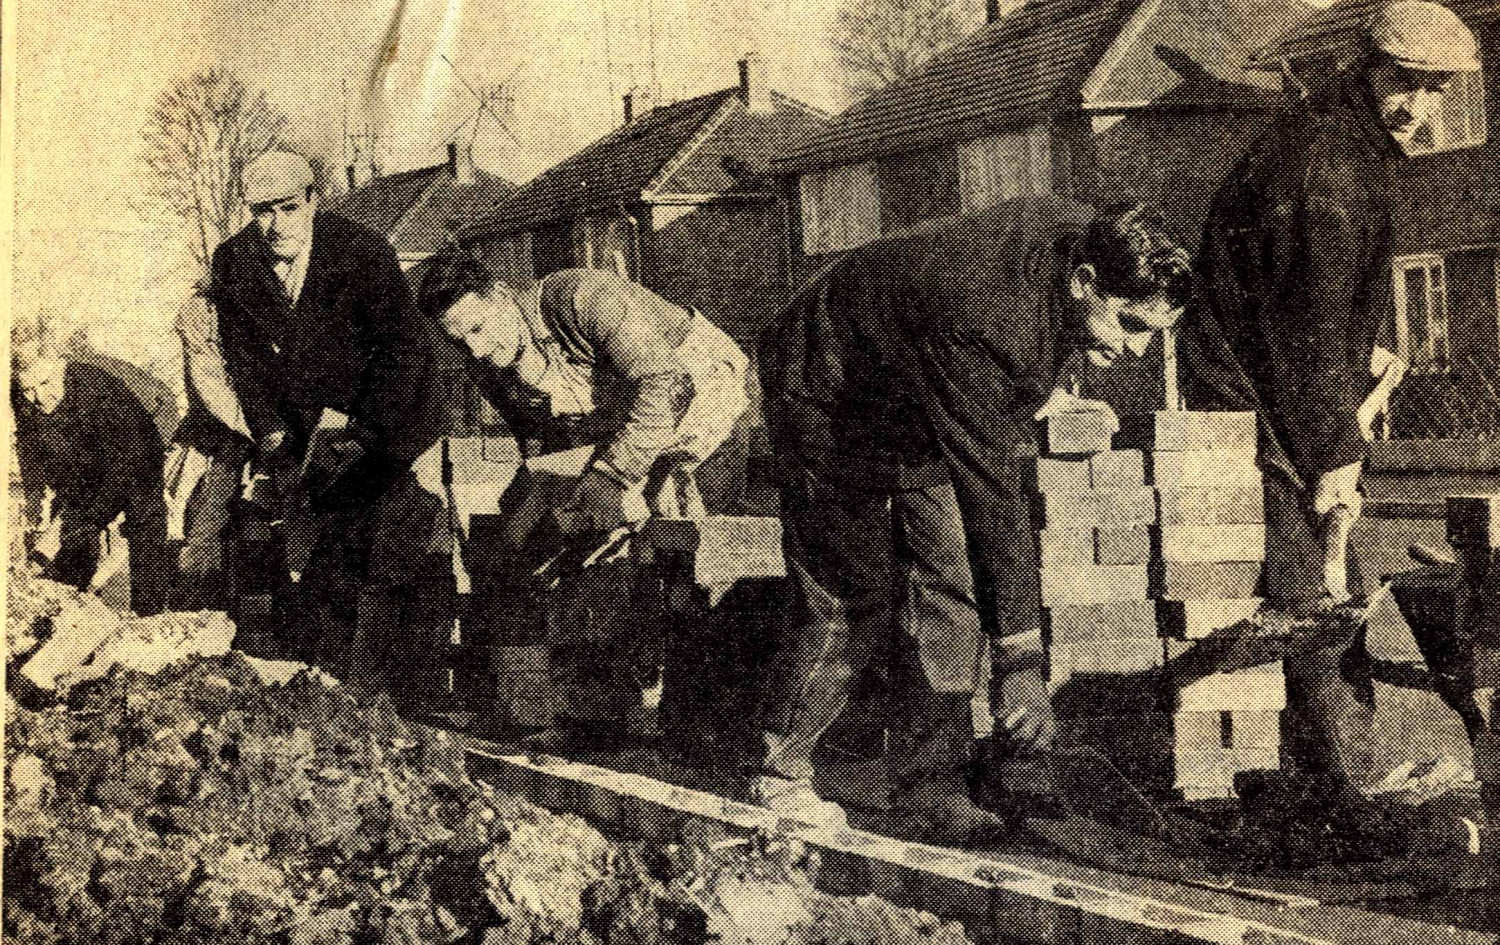 Men building a house from the Windsor, Slough and Eton ExpressD/EX2844